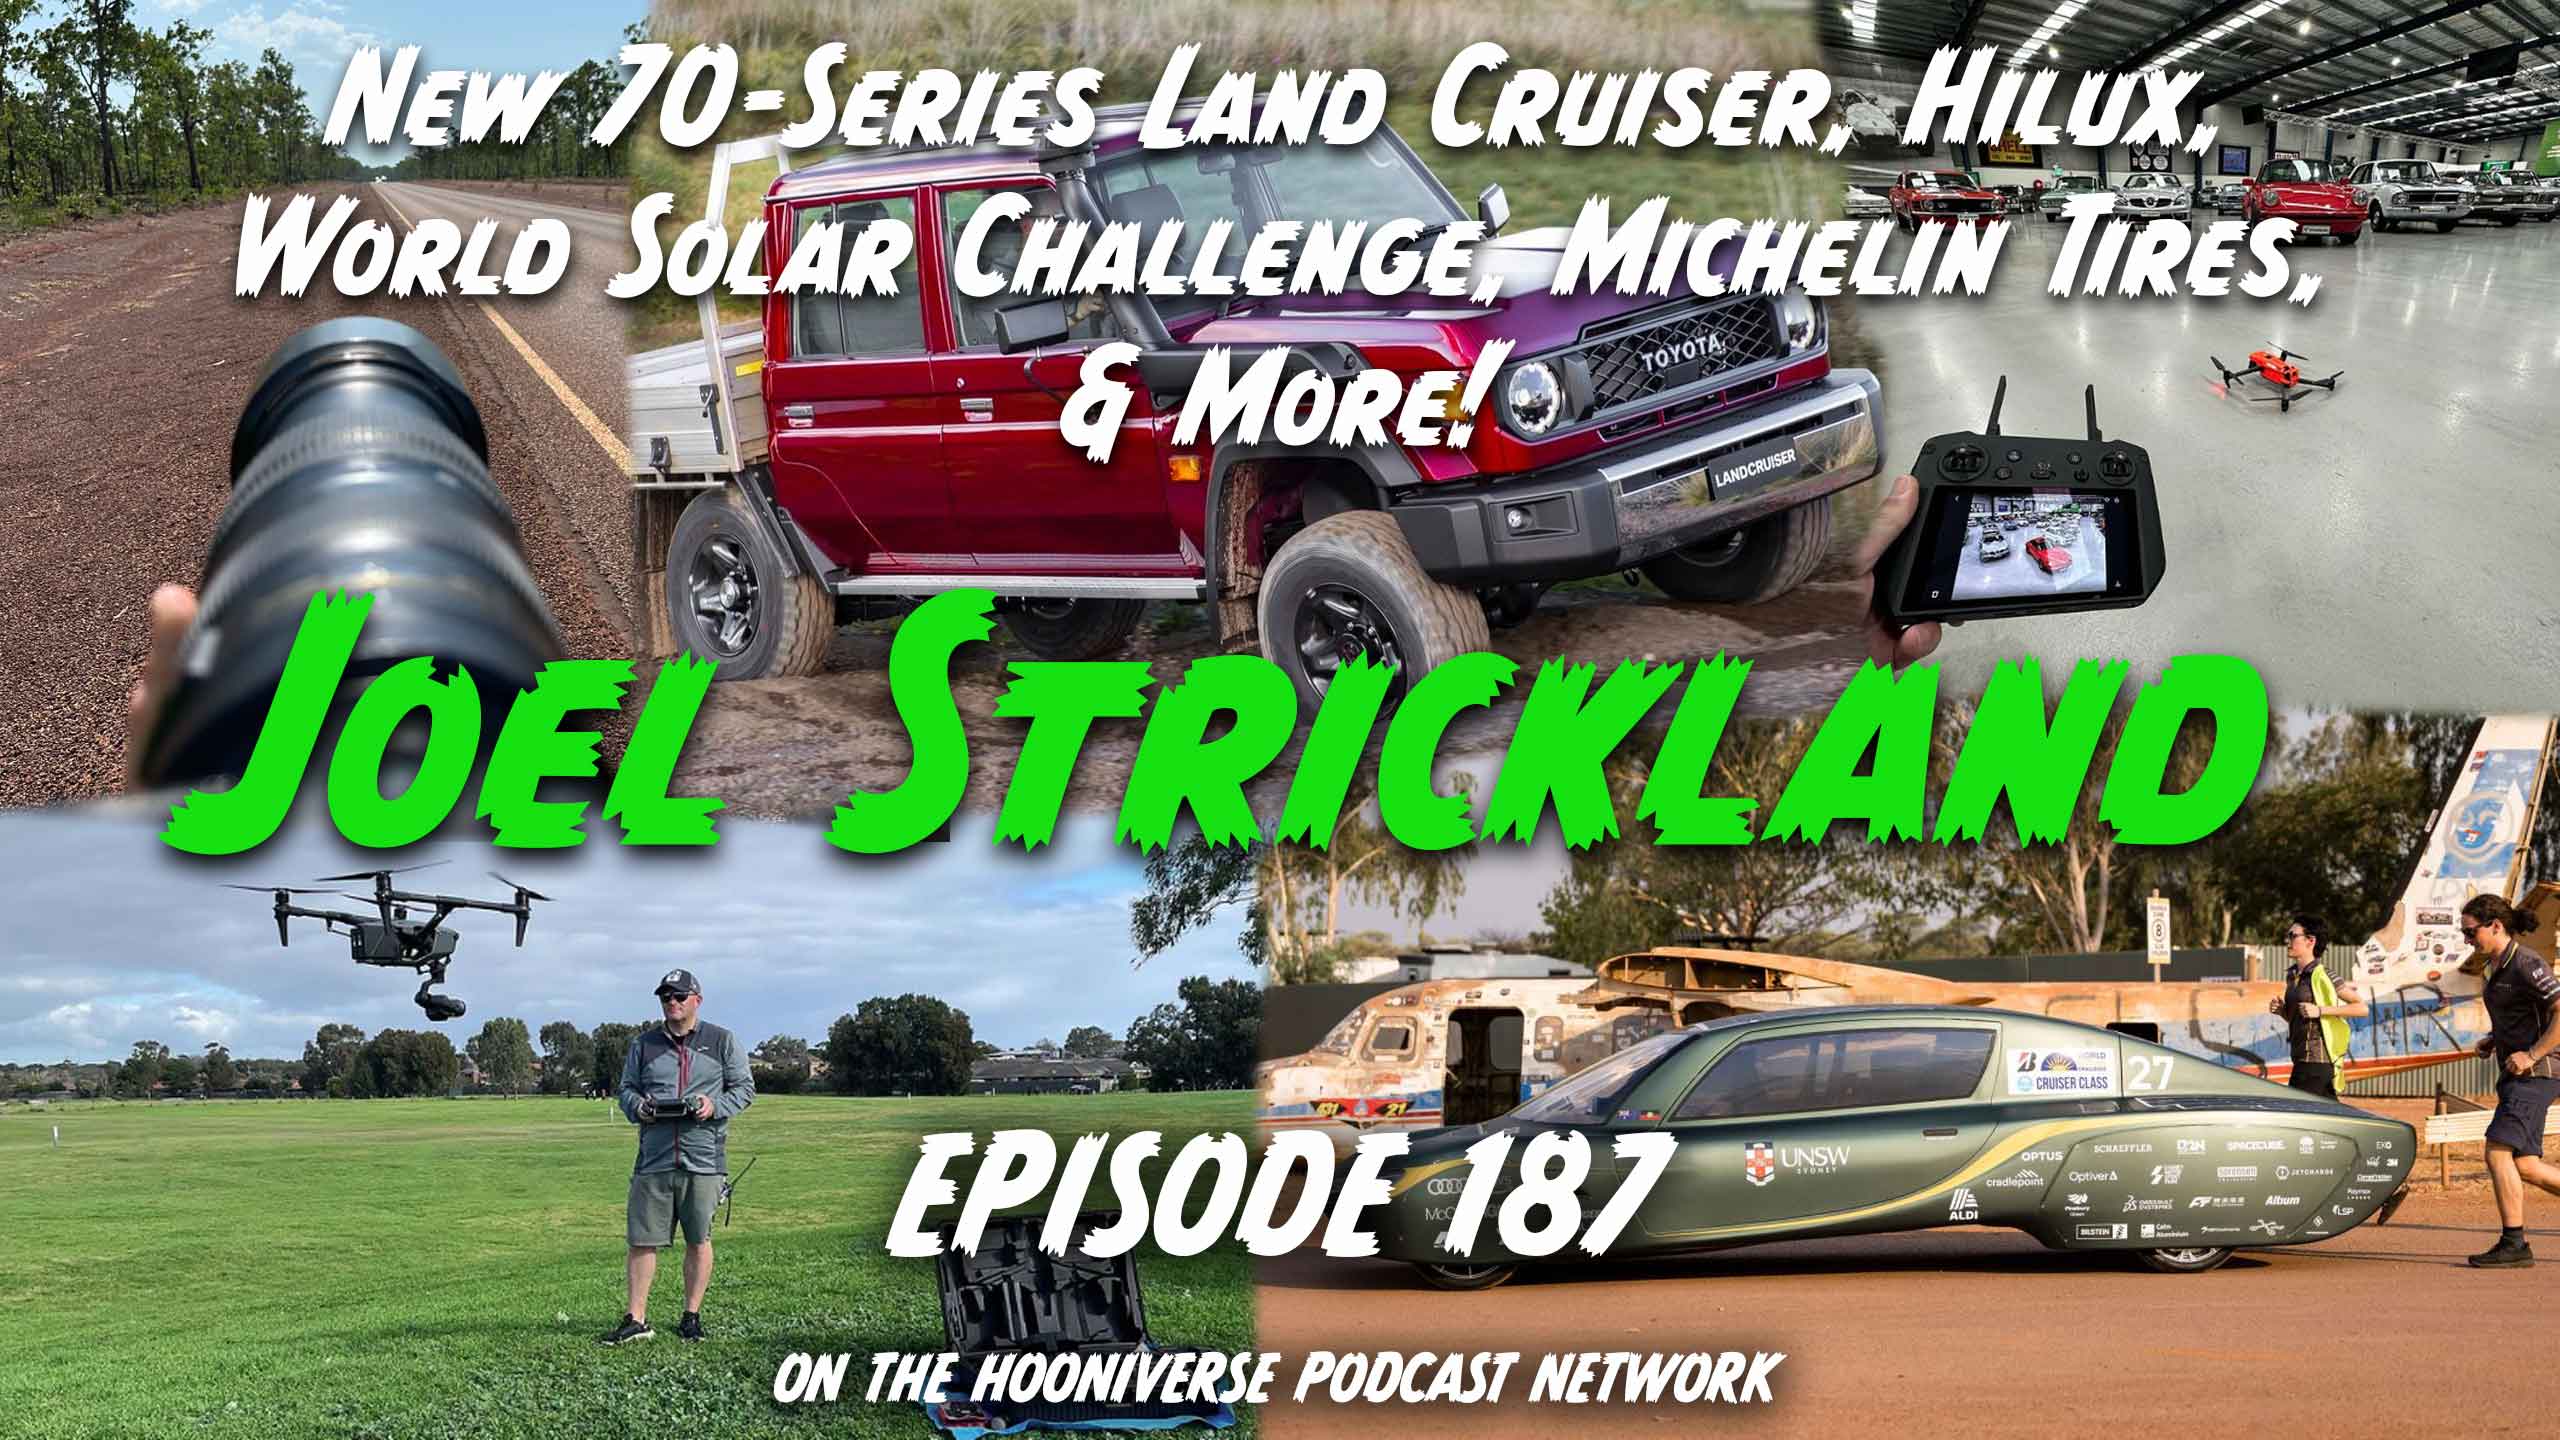 Joel-Strickland-Photo-New-70Series-Land-Cruiser-Off-The-Road-Again-Podcast-Episode-187